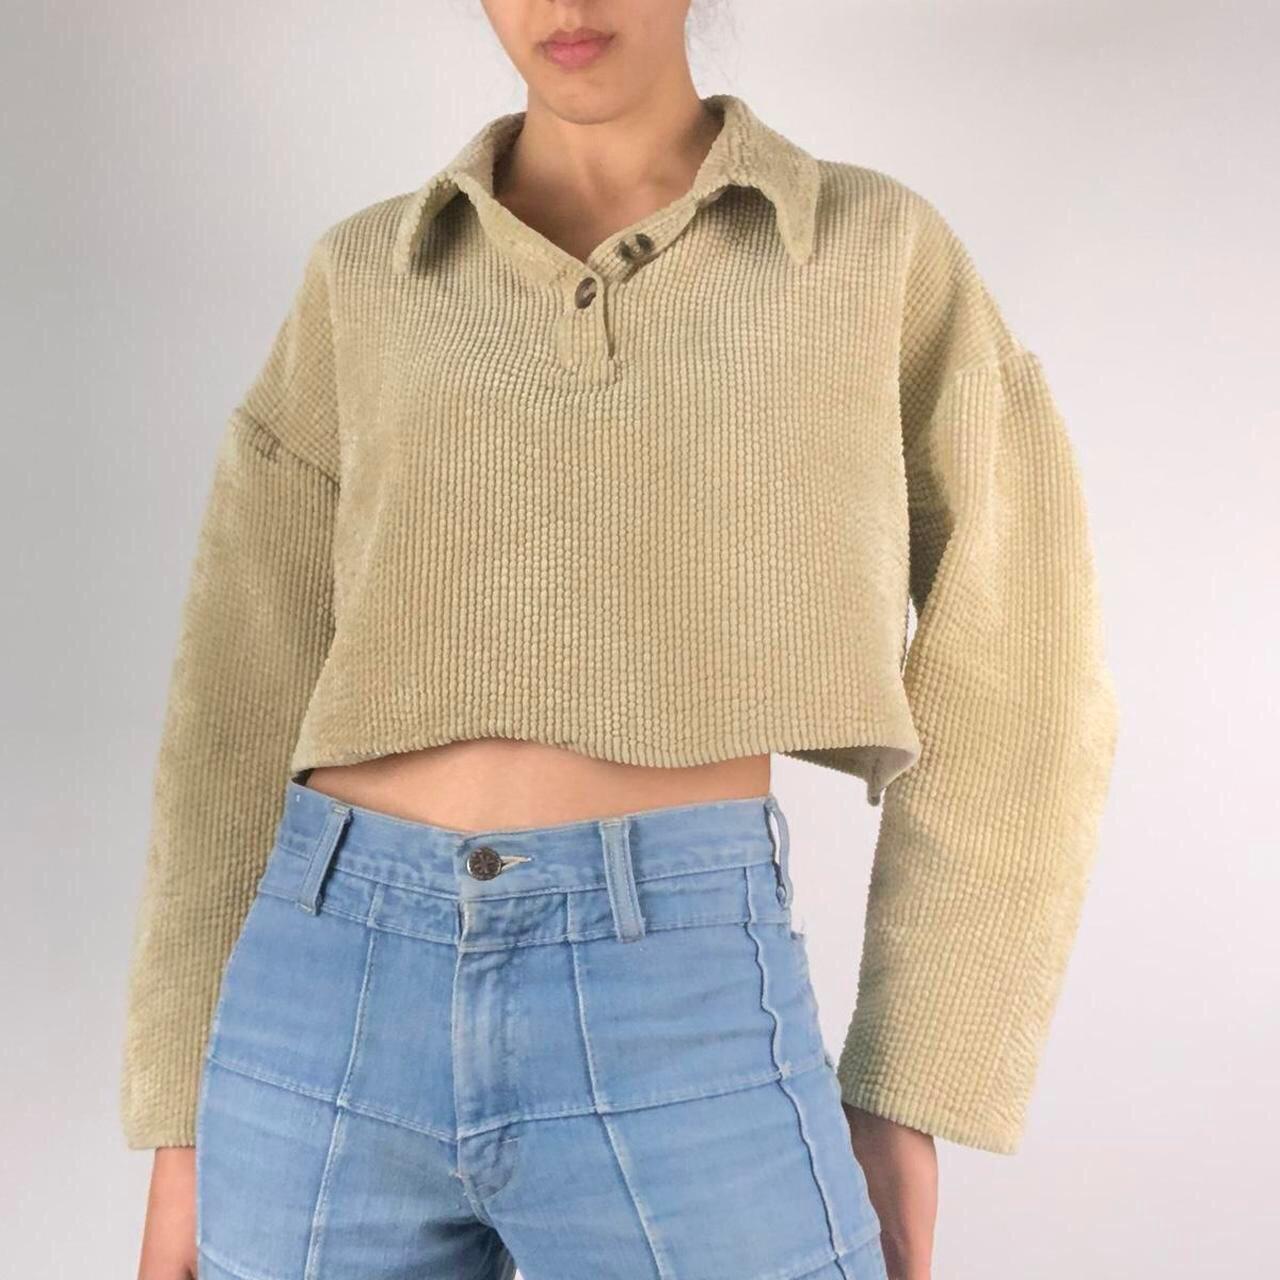 Product Image 1 - Tan cropped long sleeve sweater